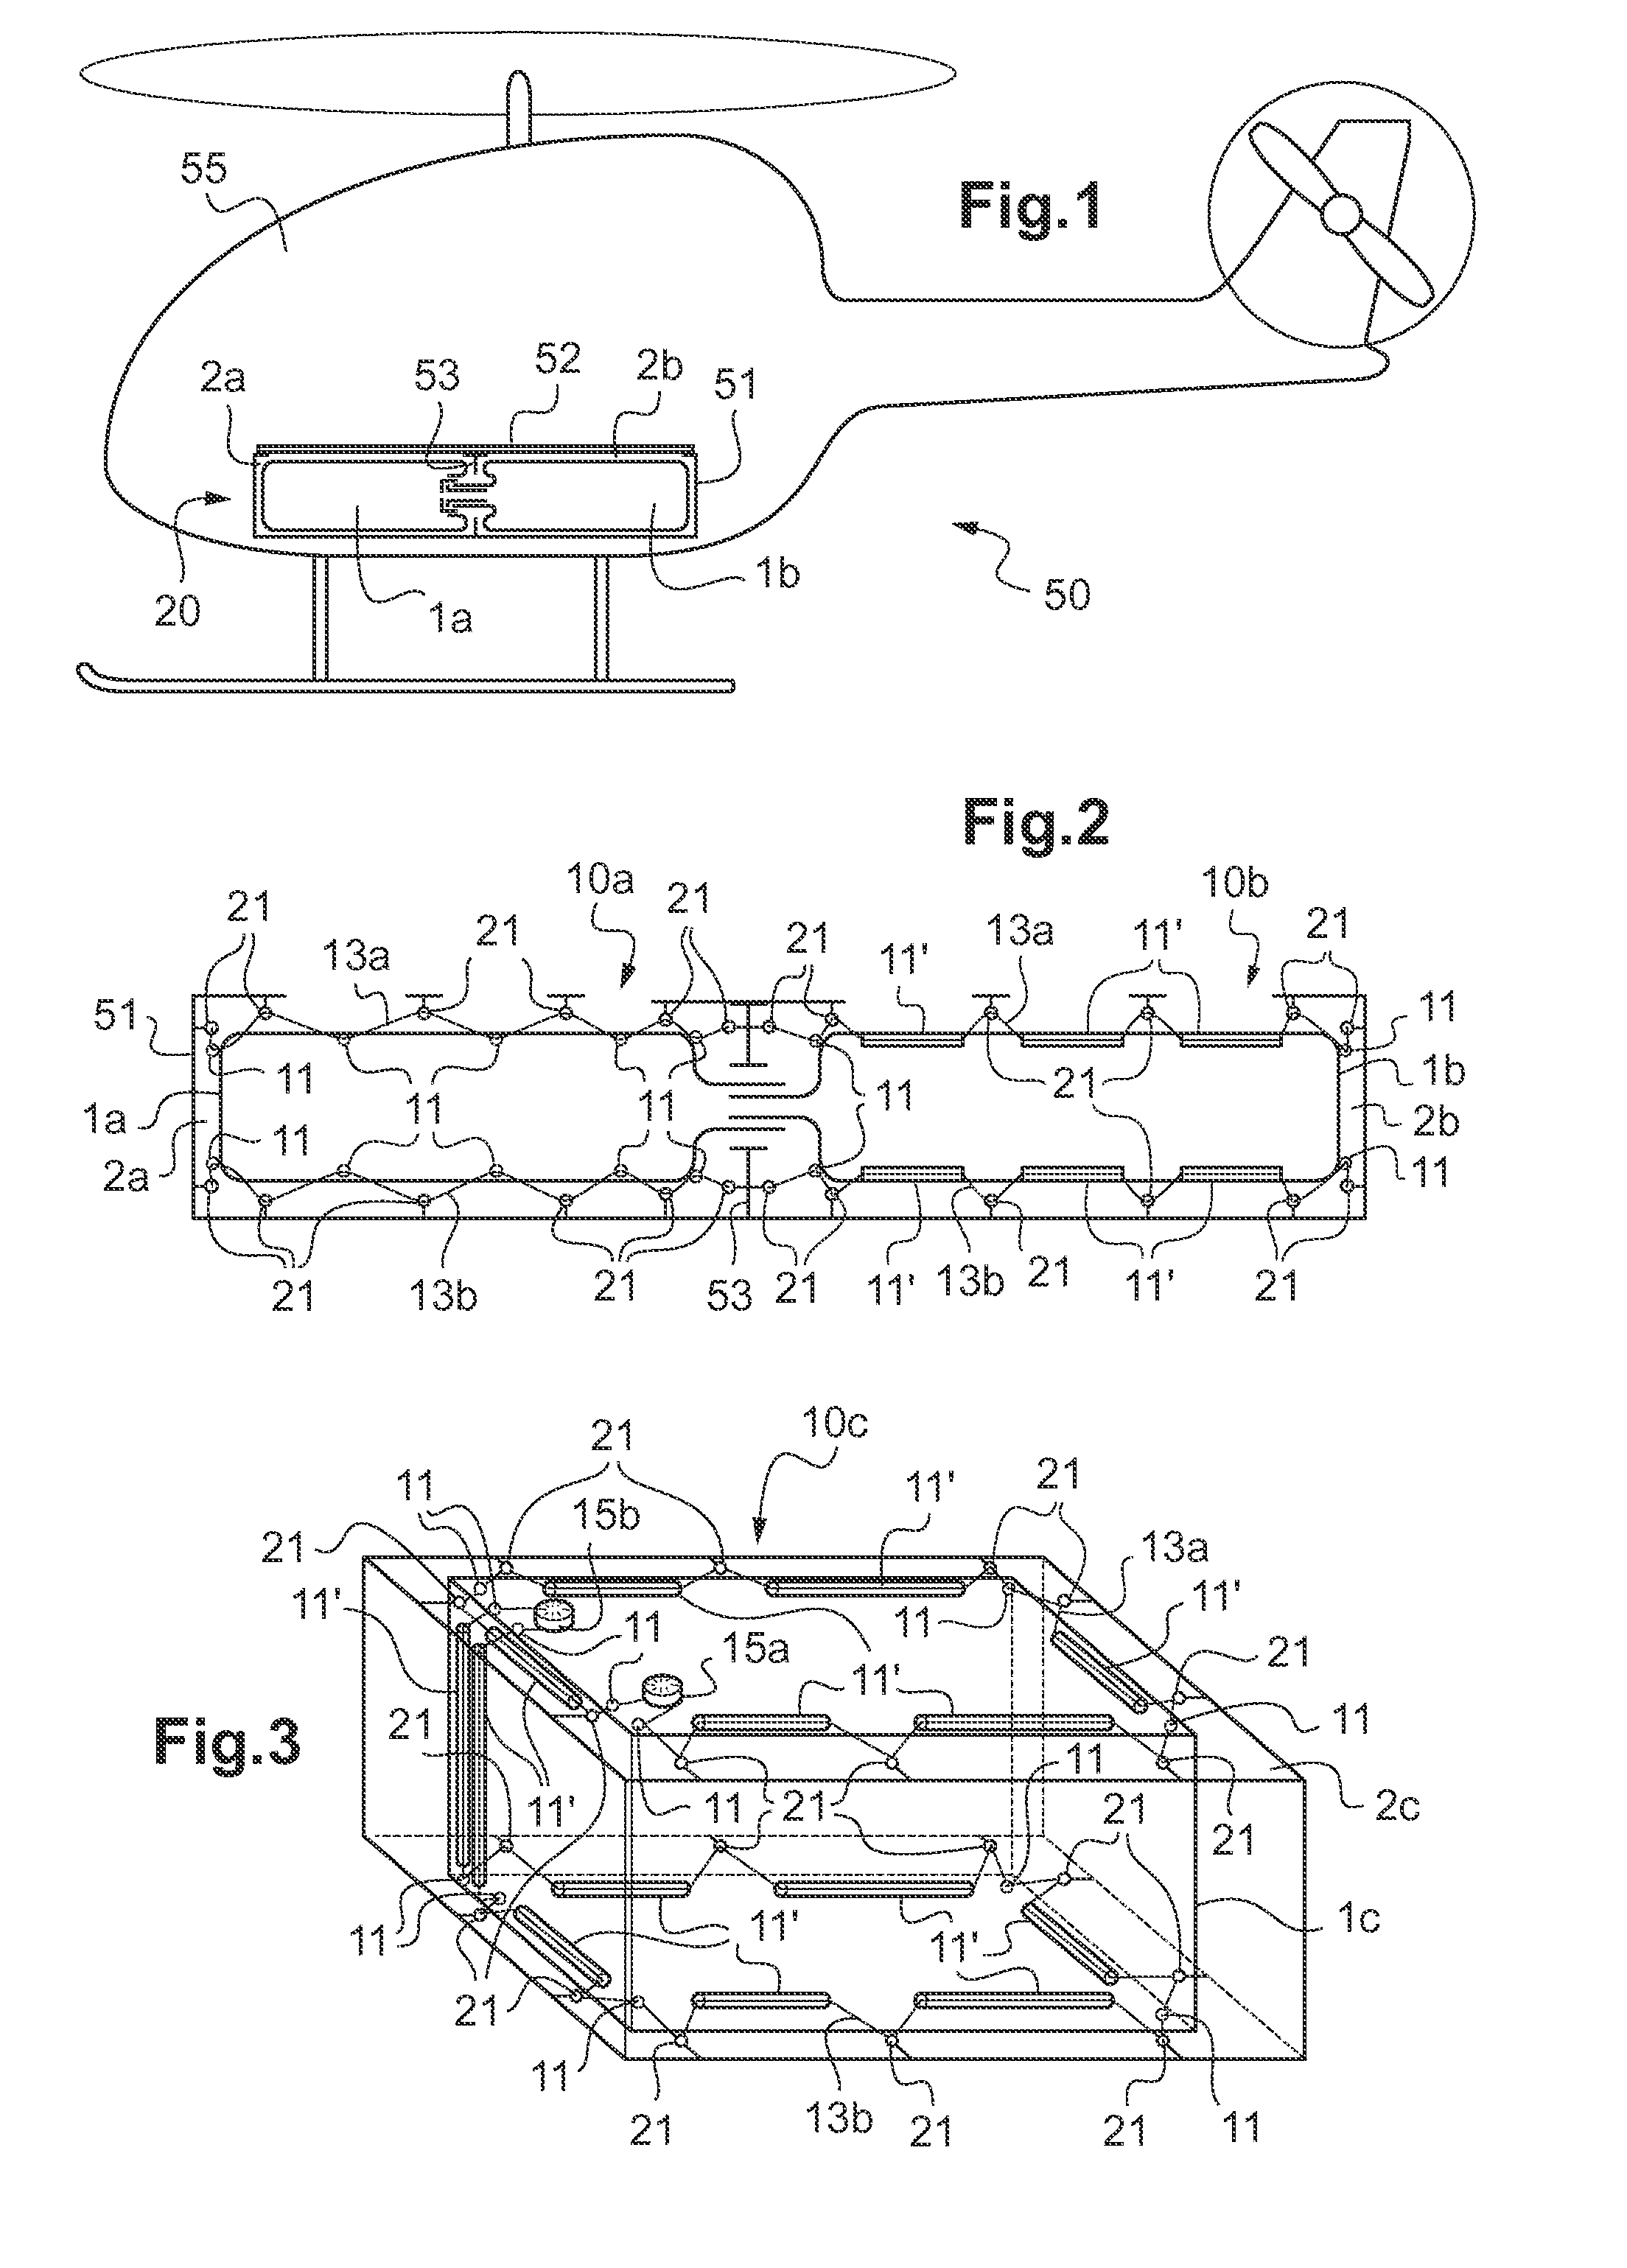 Mounting device for mounting a flexible tank inside a compartment